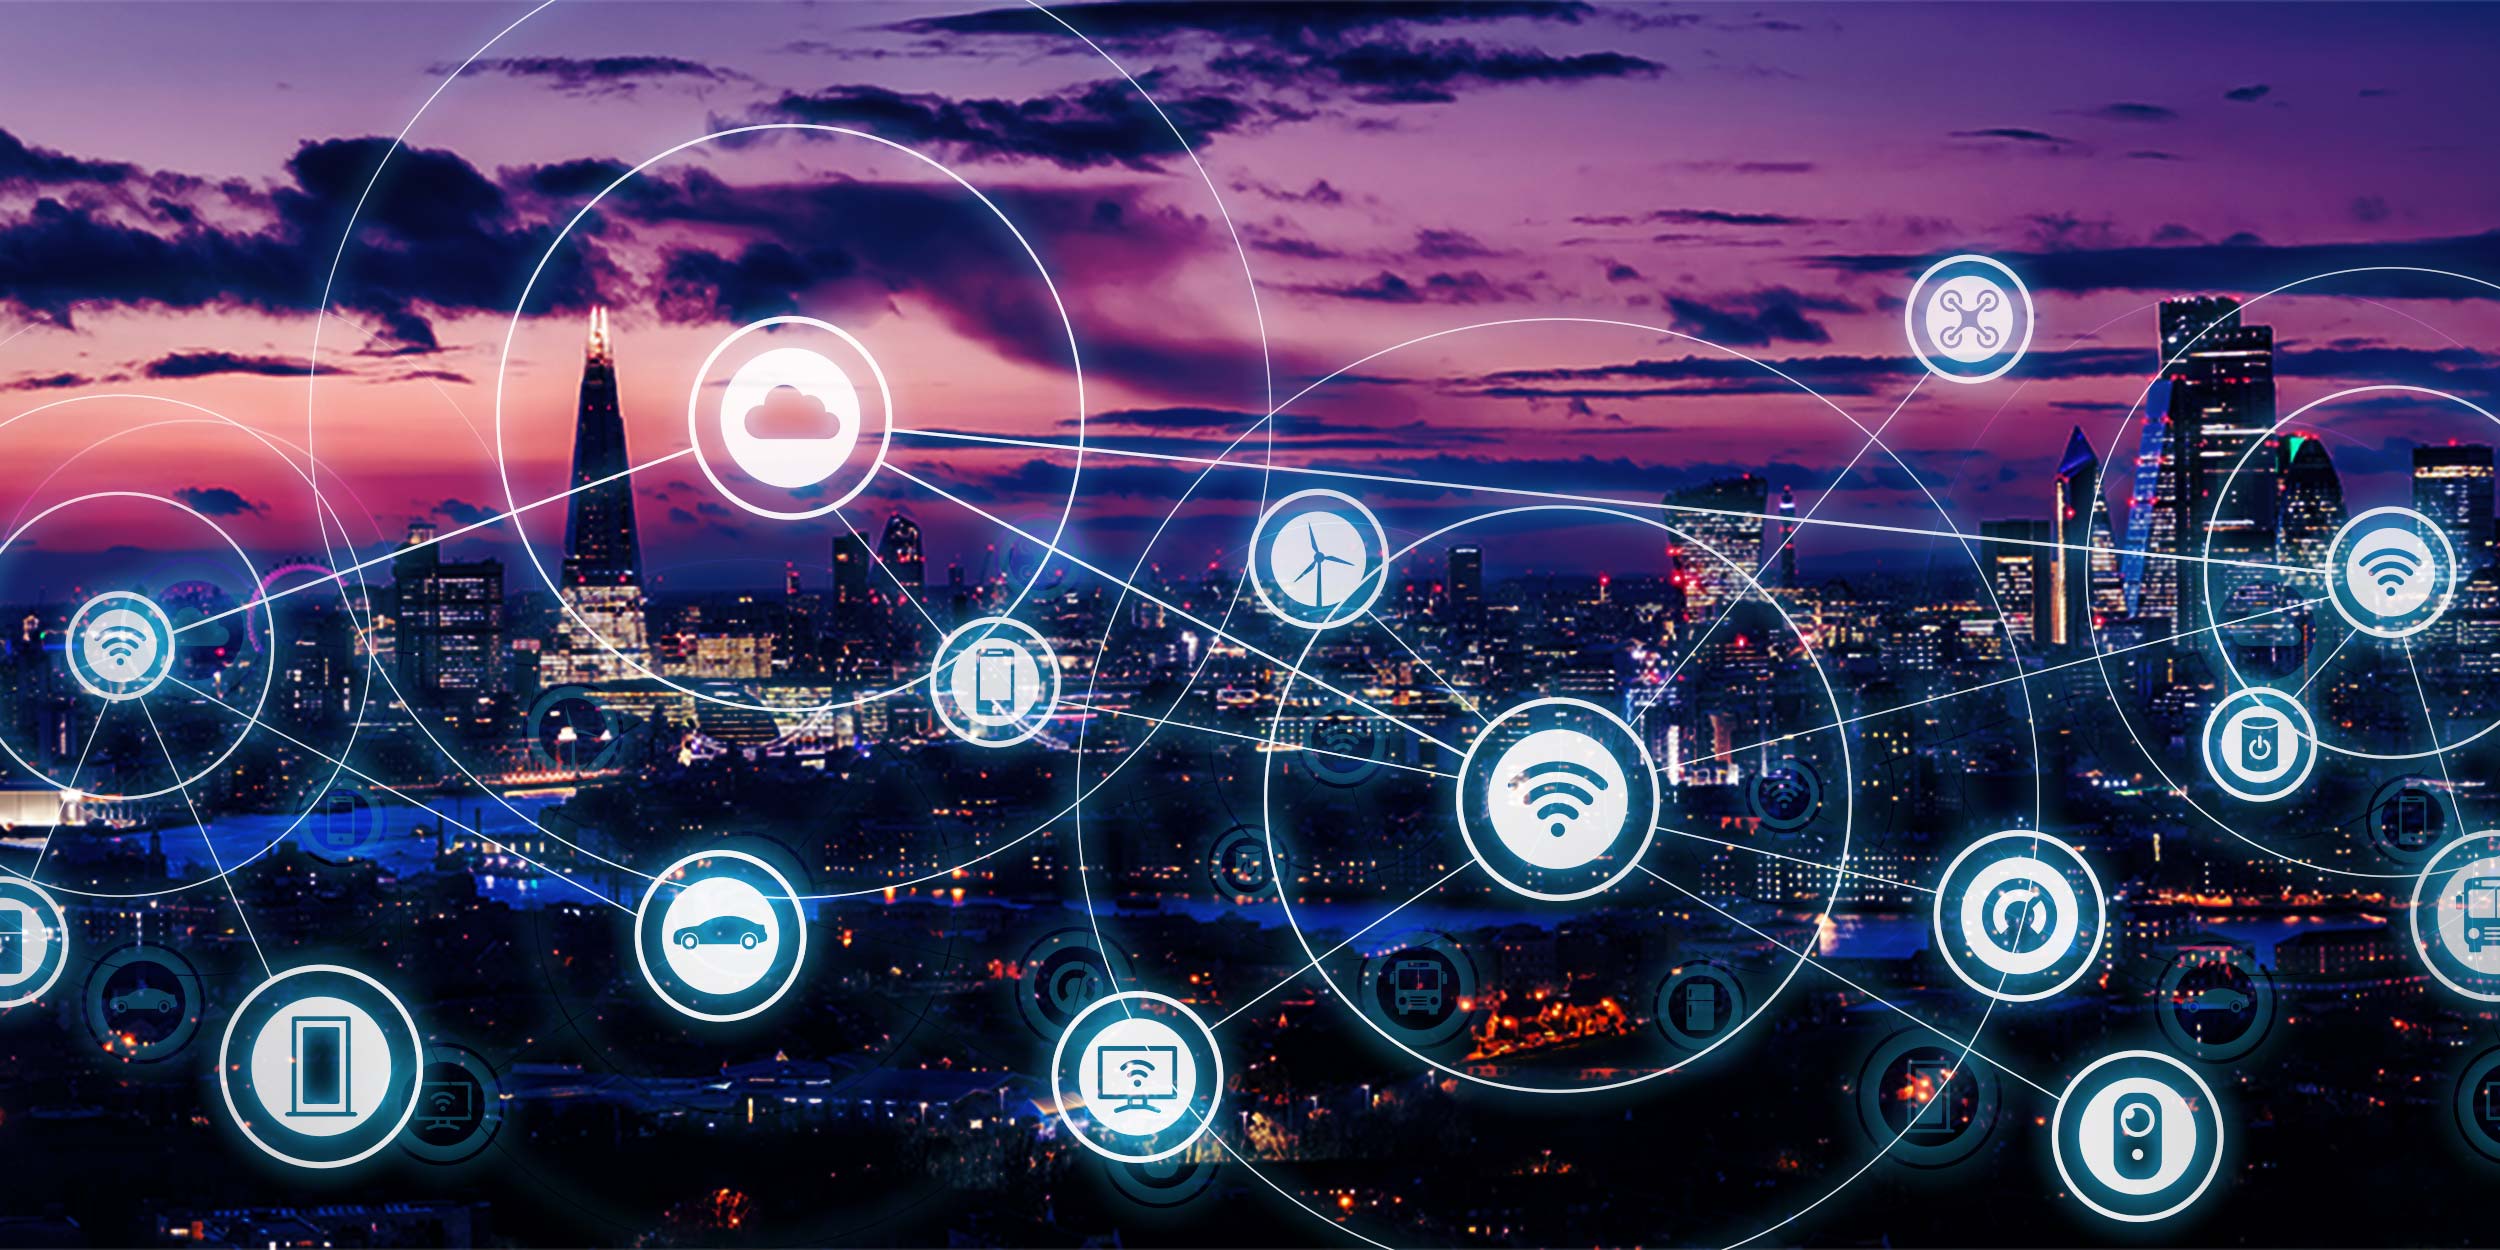 London skyline at twilight superimposed with icons representing Internet of Things (IoT) devices connected with V12's Multi-Network Data SIM